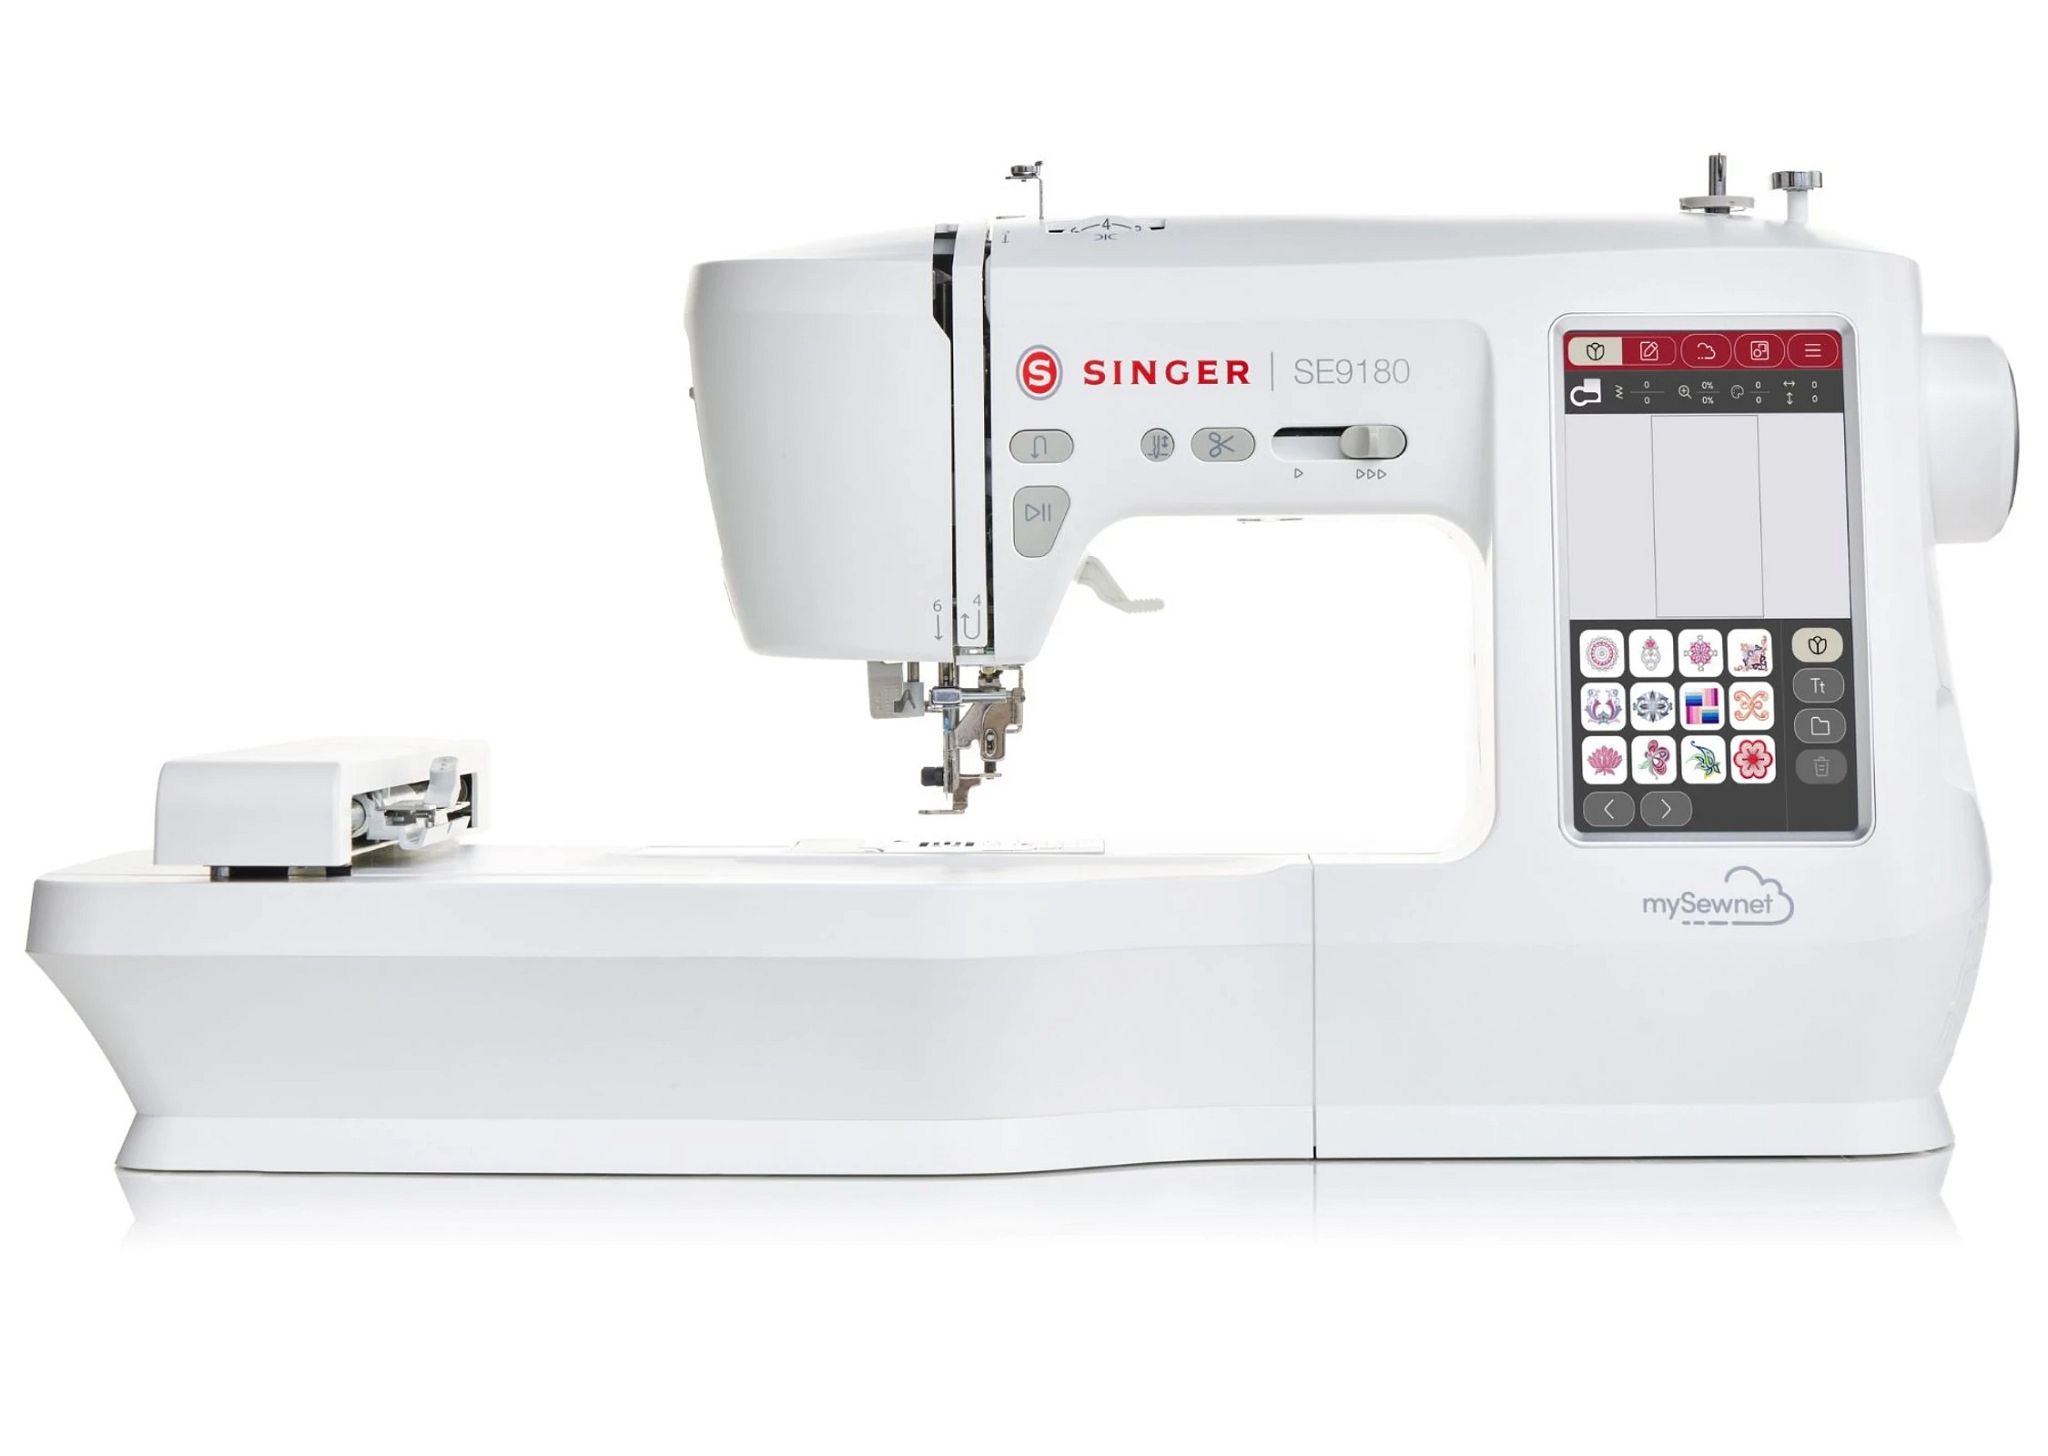 SE9180 Sewing and Embroidery Machine 